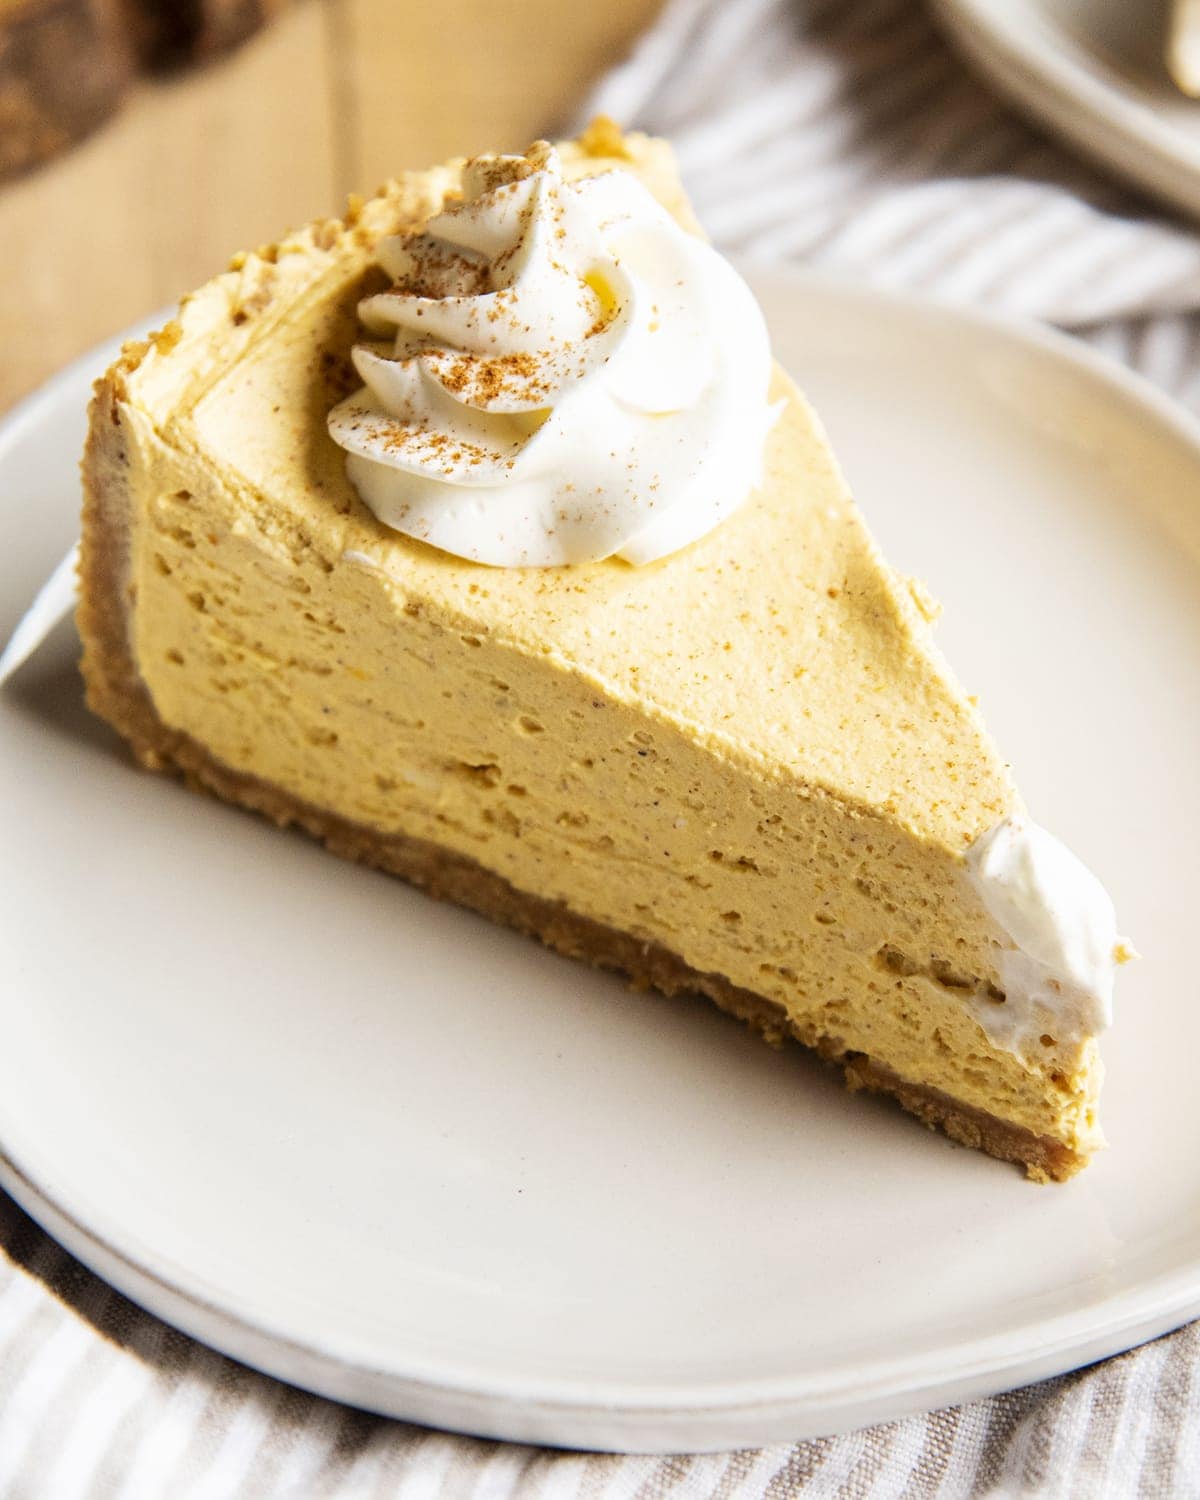 A slice of no bake pumpkin cheesecake, topped with a dollop of whipped cream and a sprinkle of cinnamon.